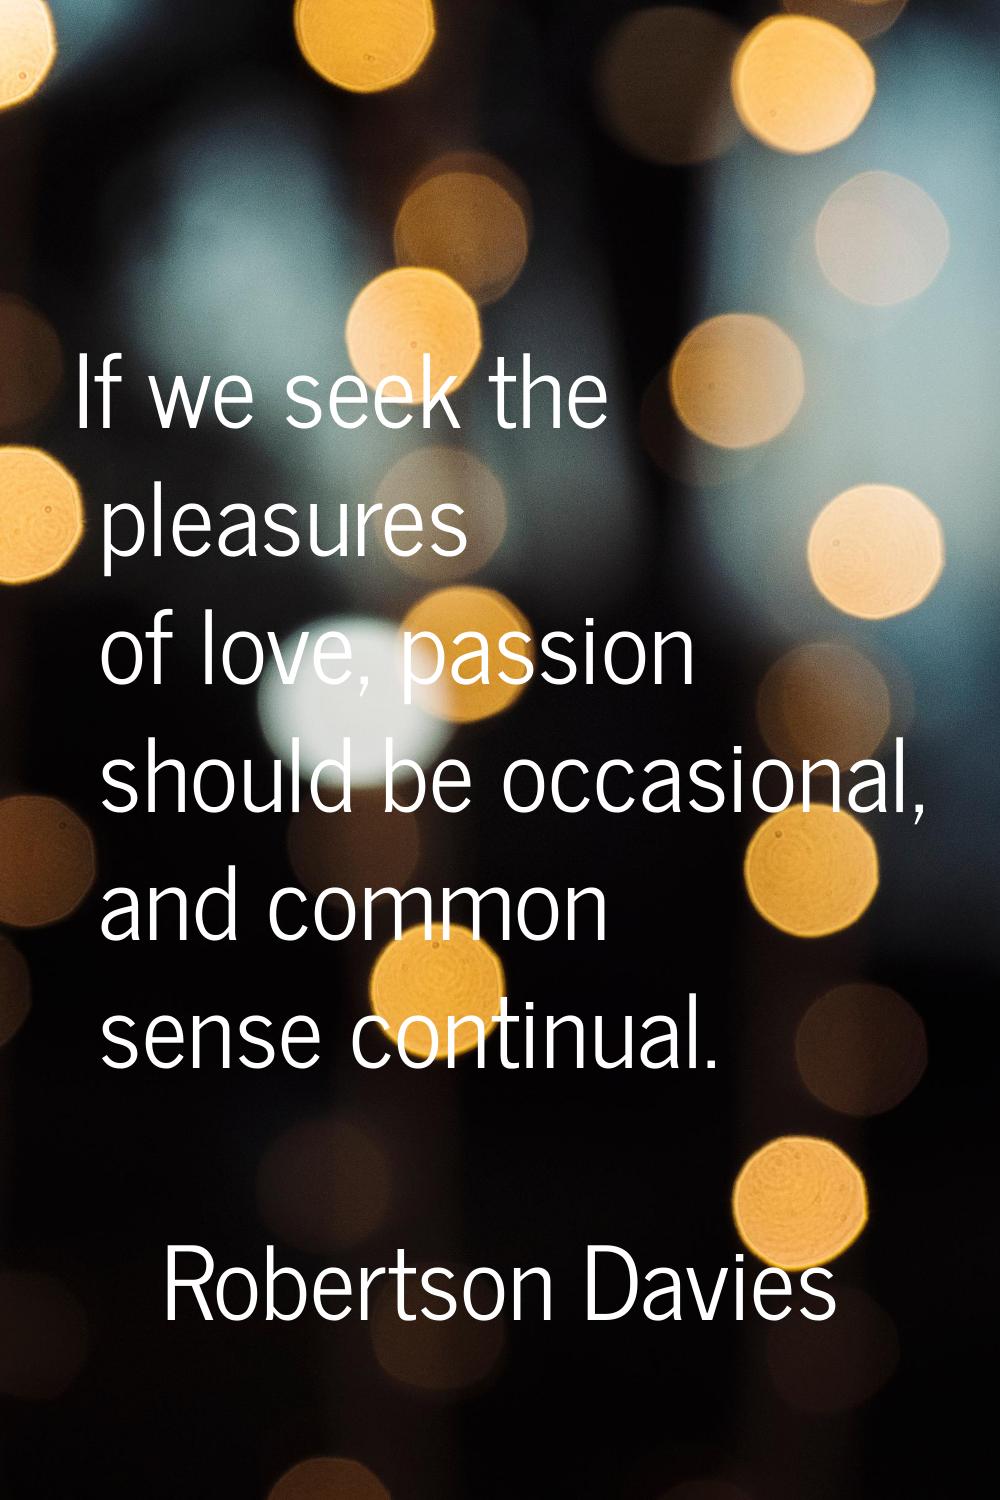 If we seek the pleasures of love, passion should be occasional, and common sense continual.